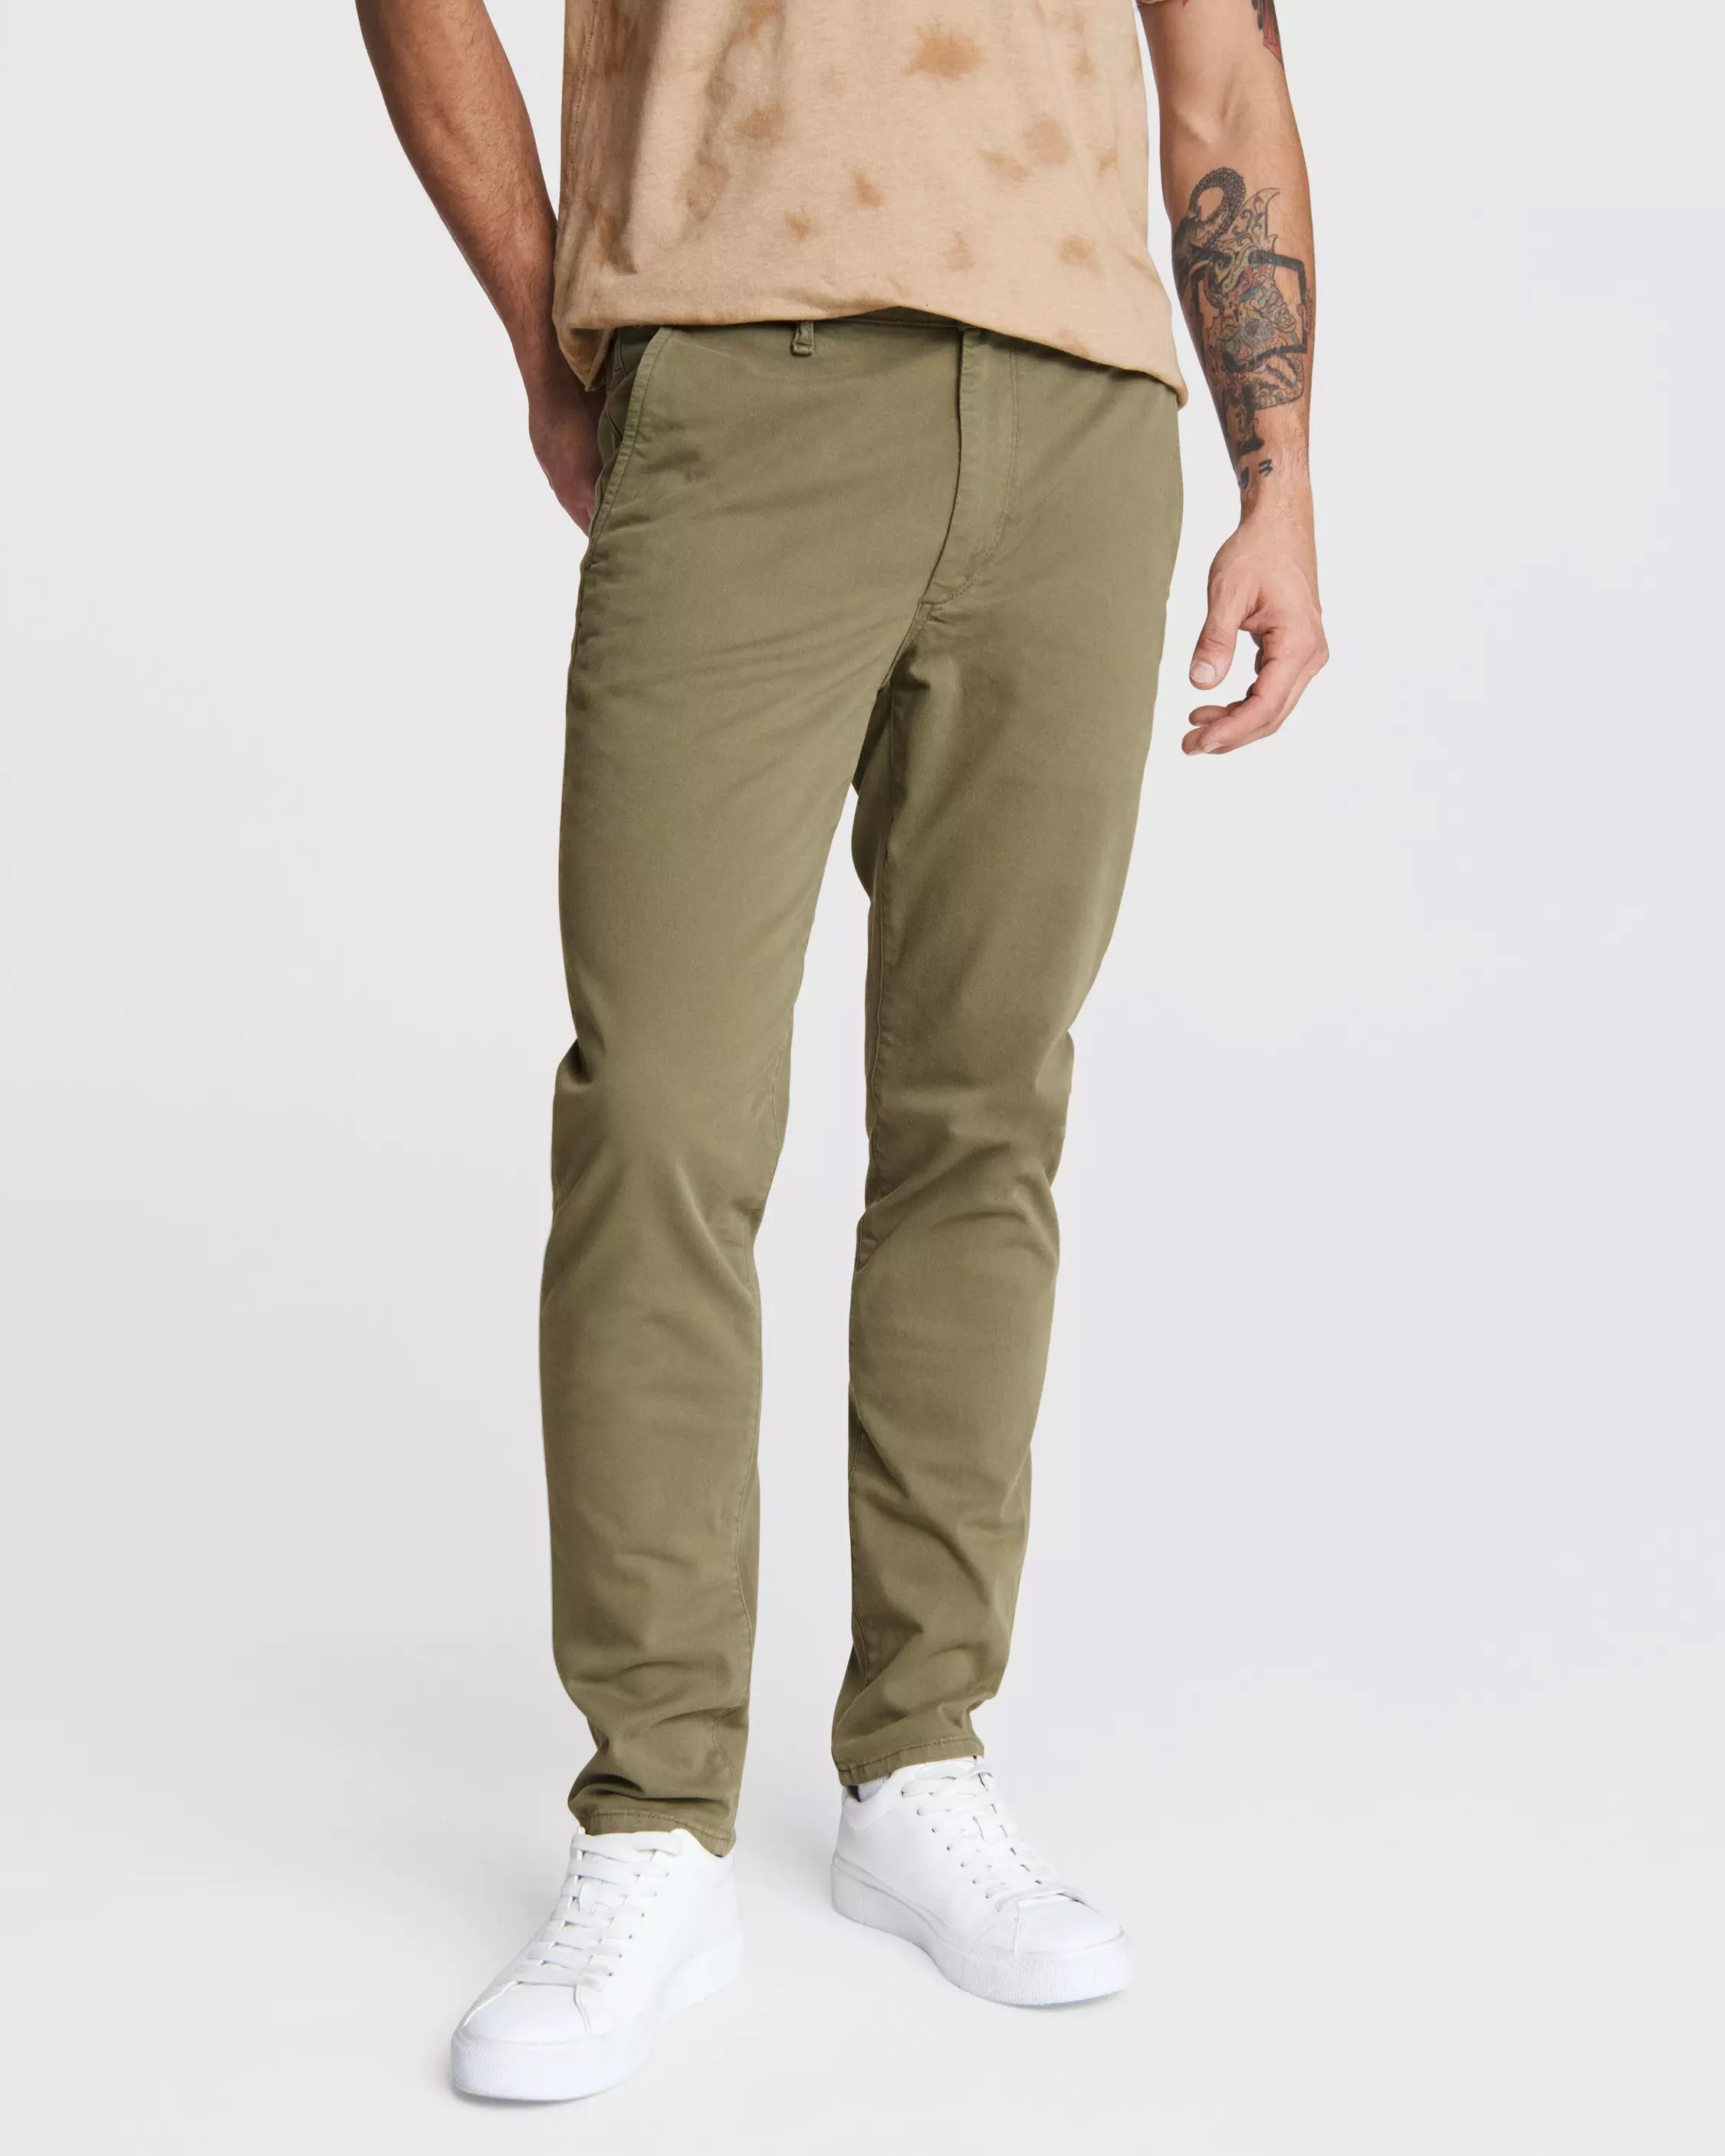 12 Types of Pants for Men – Different Trouser Styles 2024 | FashionBeans |  Mens casual dress outfits, Mens outfits, Mens casual dress